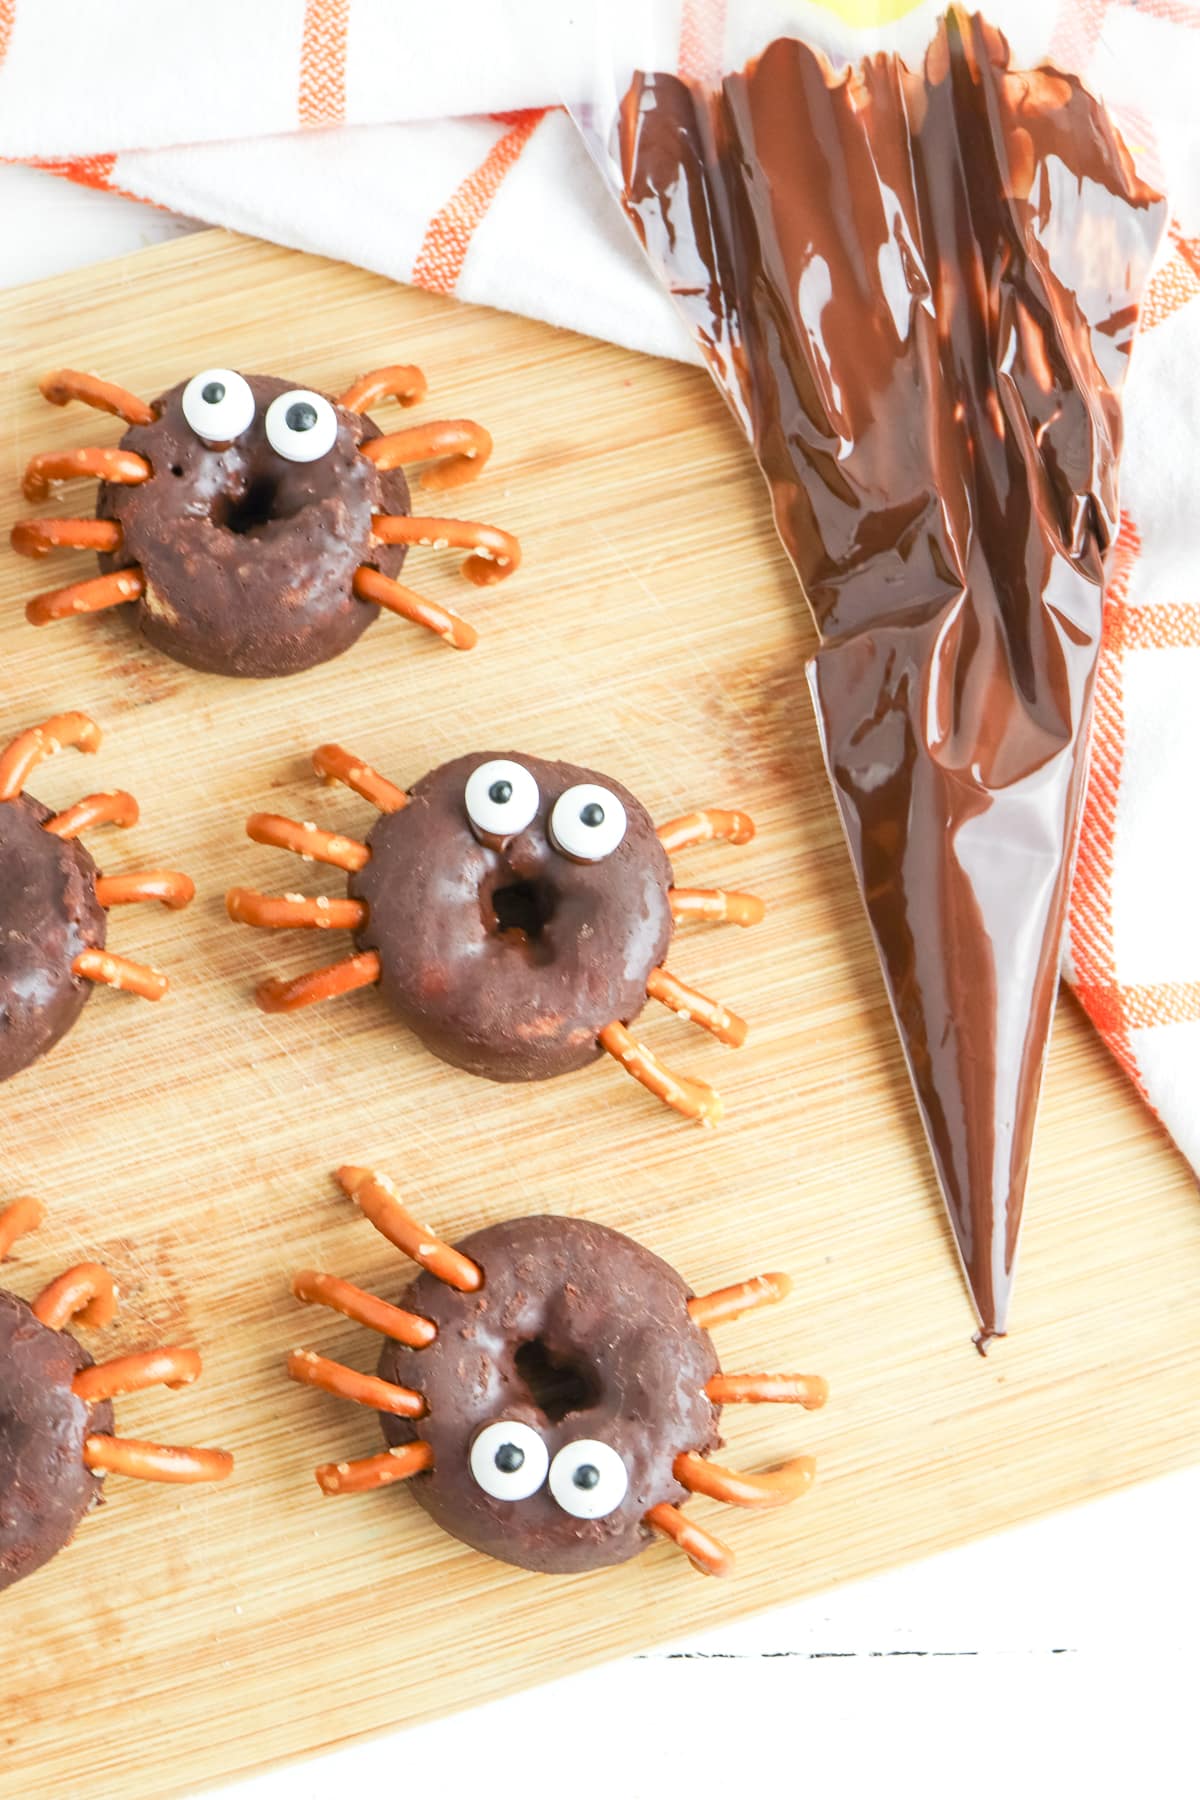 use melted chocolate to adhere candy eyes